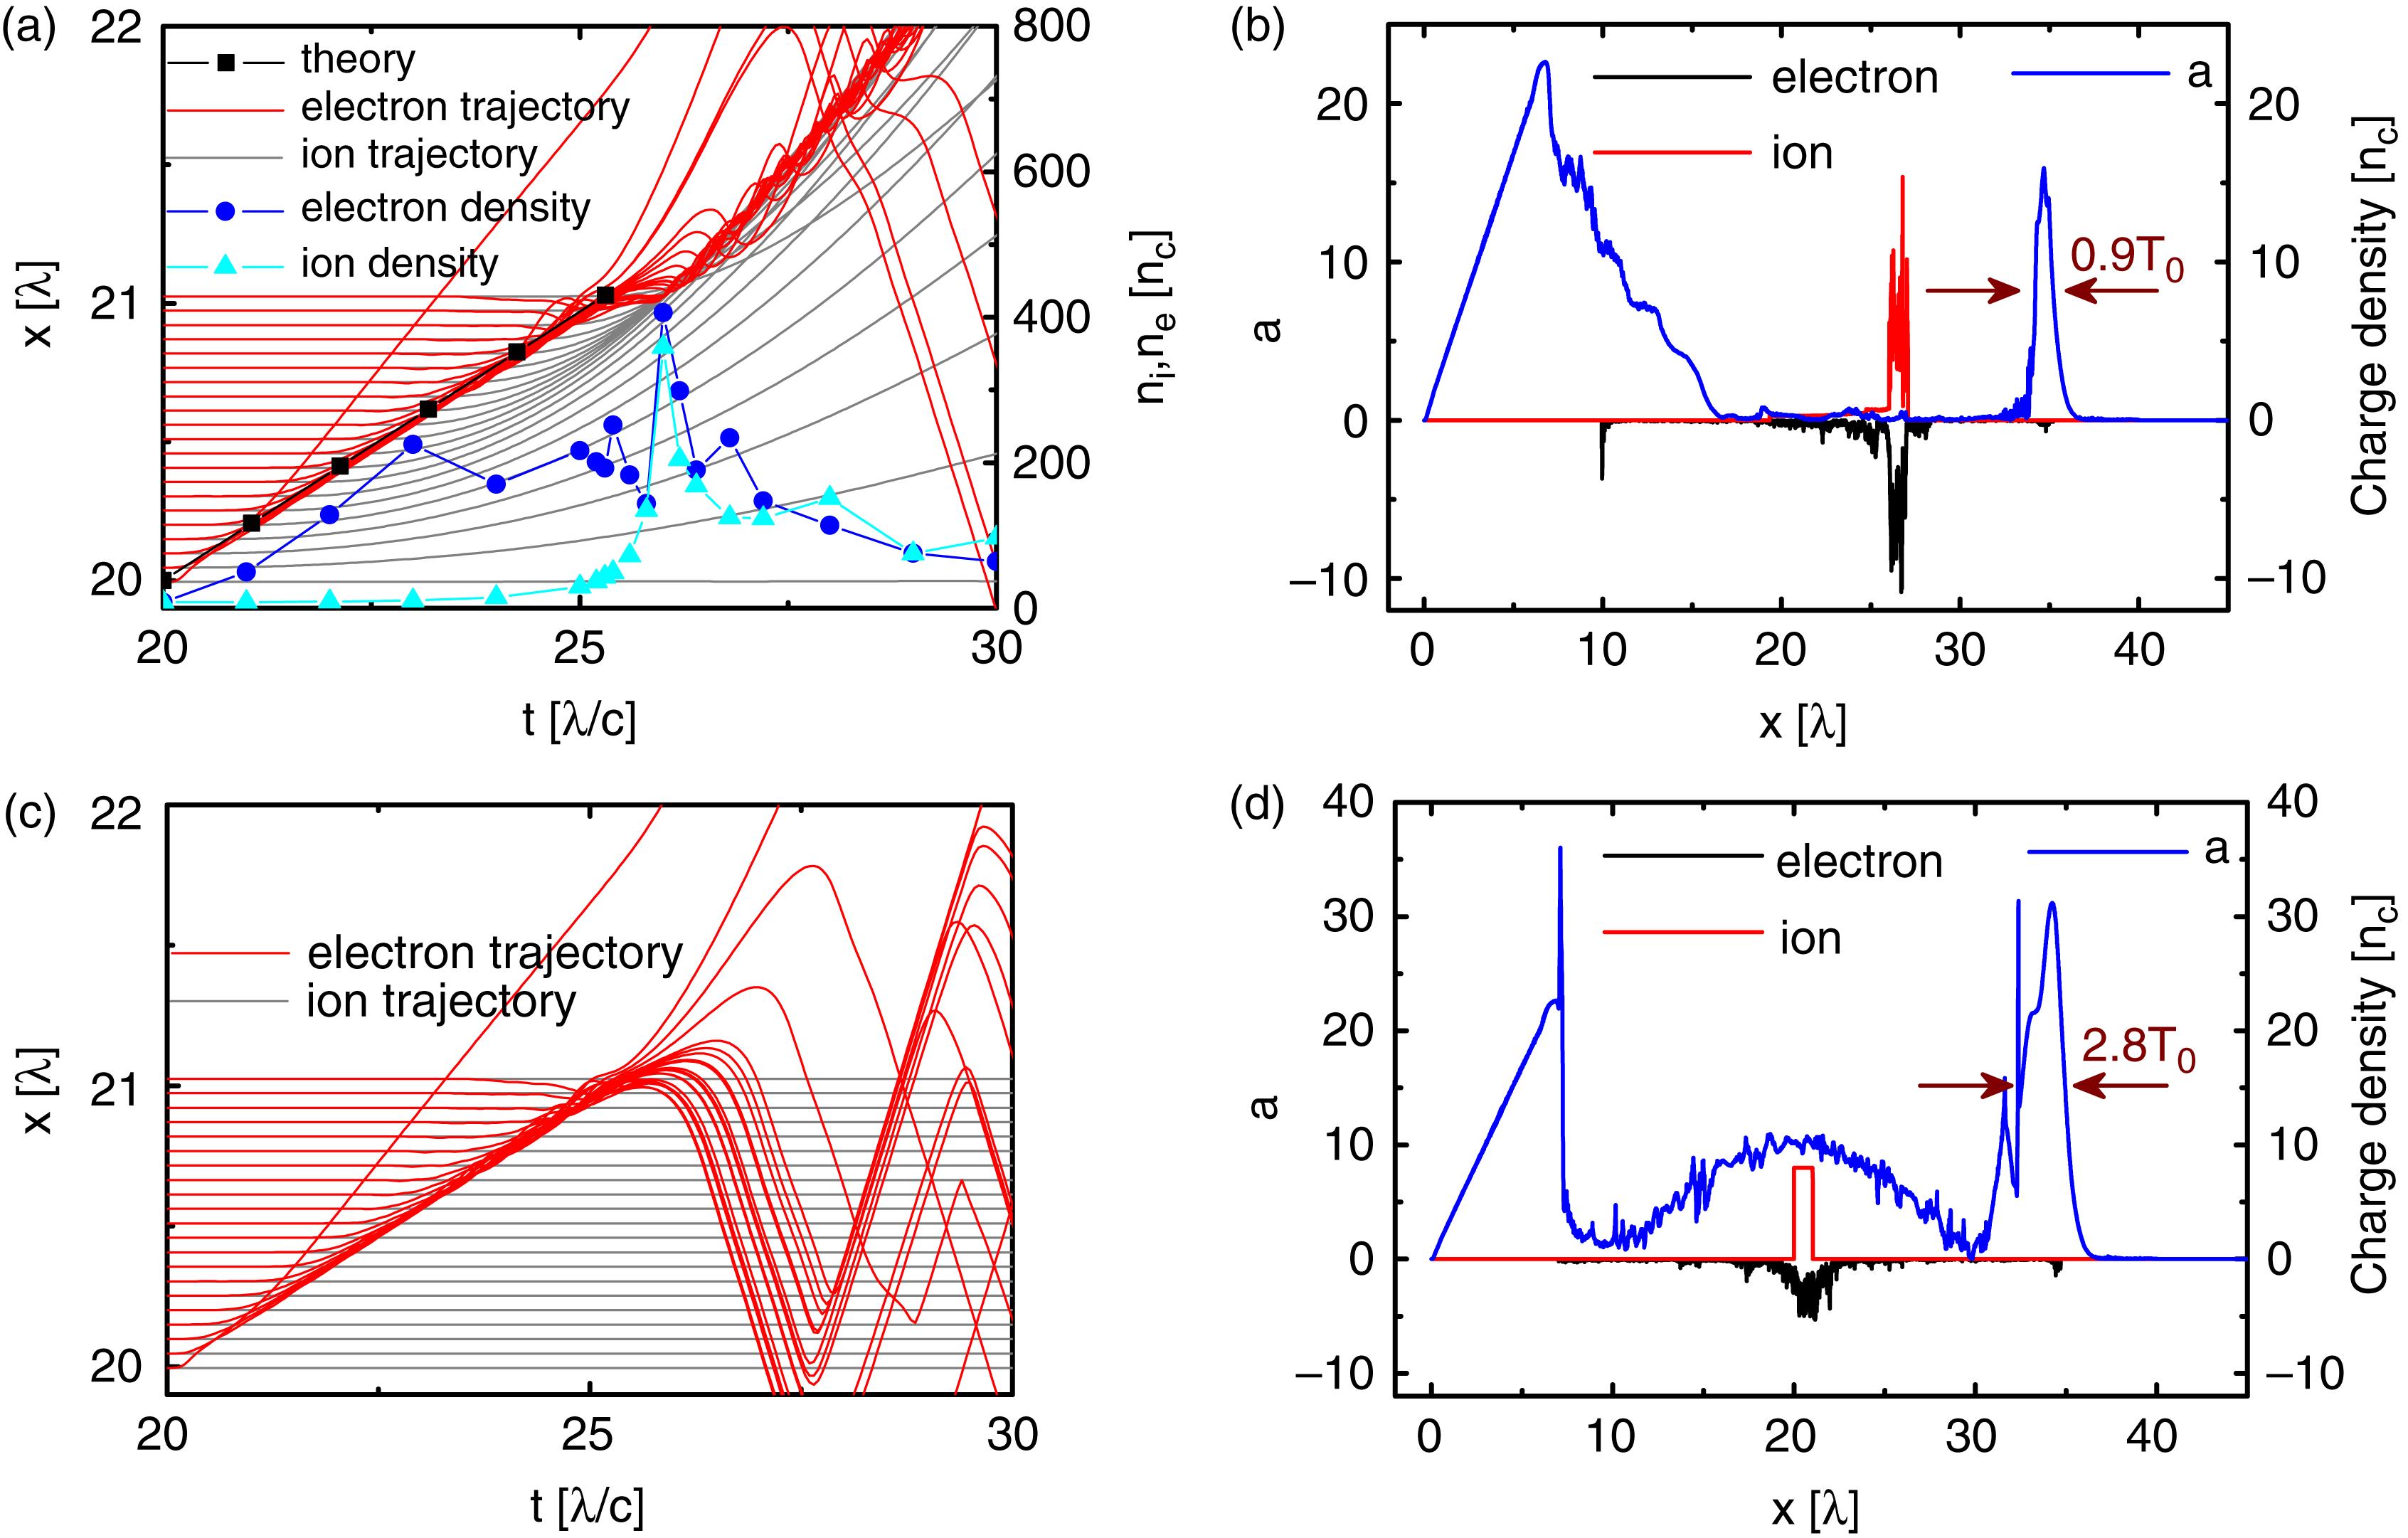 1D PIC simulation results for ( and ), , and . (a) Electron and proton trajectories and their density peaks versus time. (b) Laser profile (blue solid line) and charge density of electrons (black solid line) and ions (red solid line) at for the case of moving ions. (c) Electron and proton trajectories and (d) laser profile (blue solid line) and charge density of electrons (black solid line) and ions (red solid line) at for the case of ions at rest.